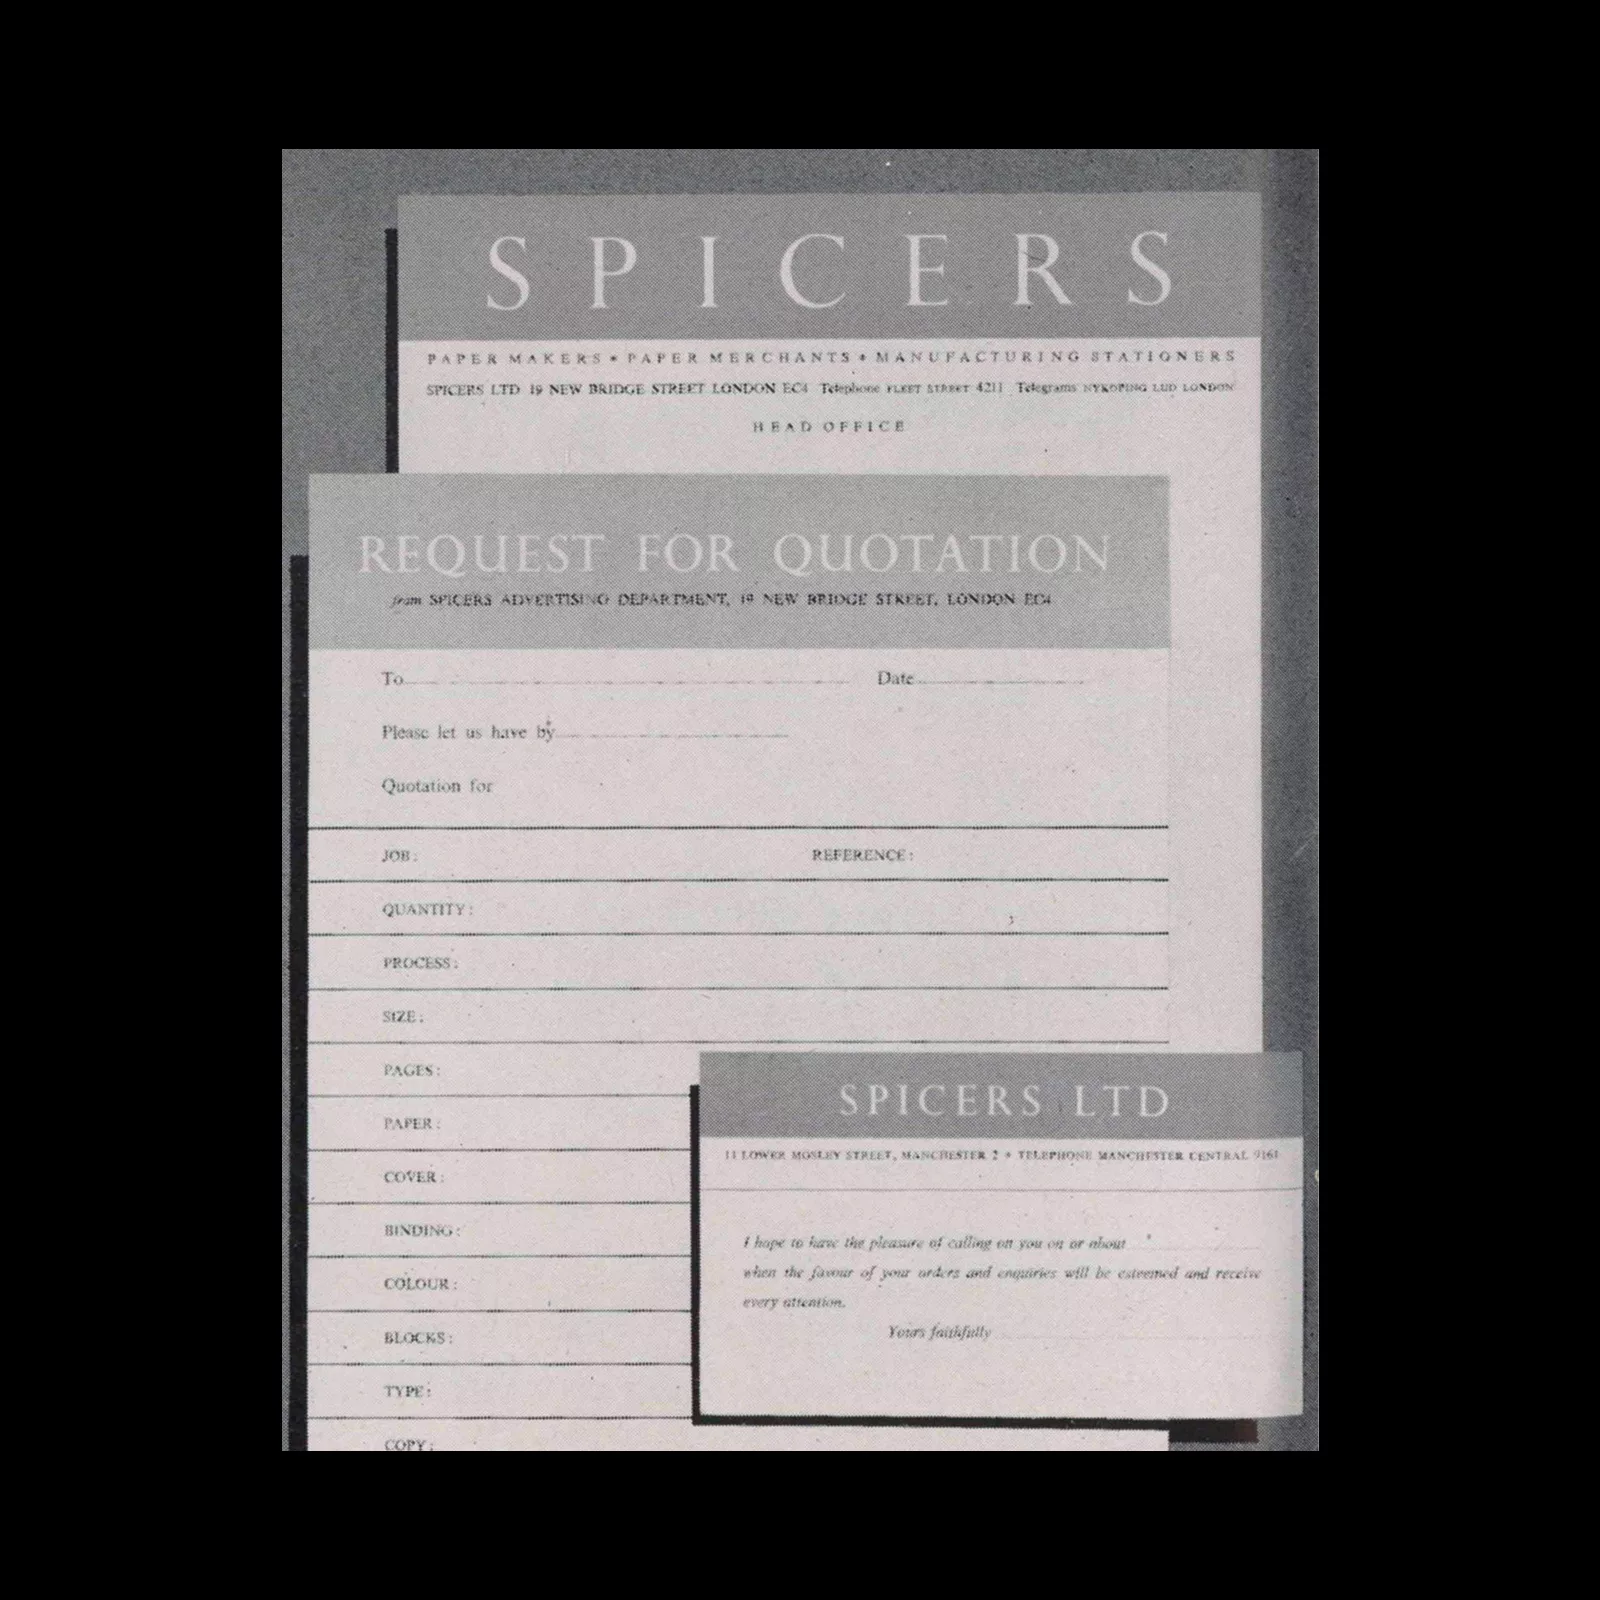 A new range of business stationery for Spicers Ltd. Hand drawn lettering closely based on Perpetua Titling capitals is a characteristic of Spicers' house style. DESIGNER: Edward Price.